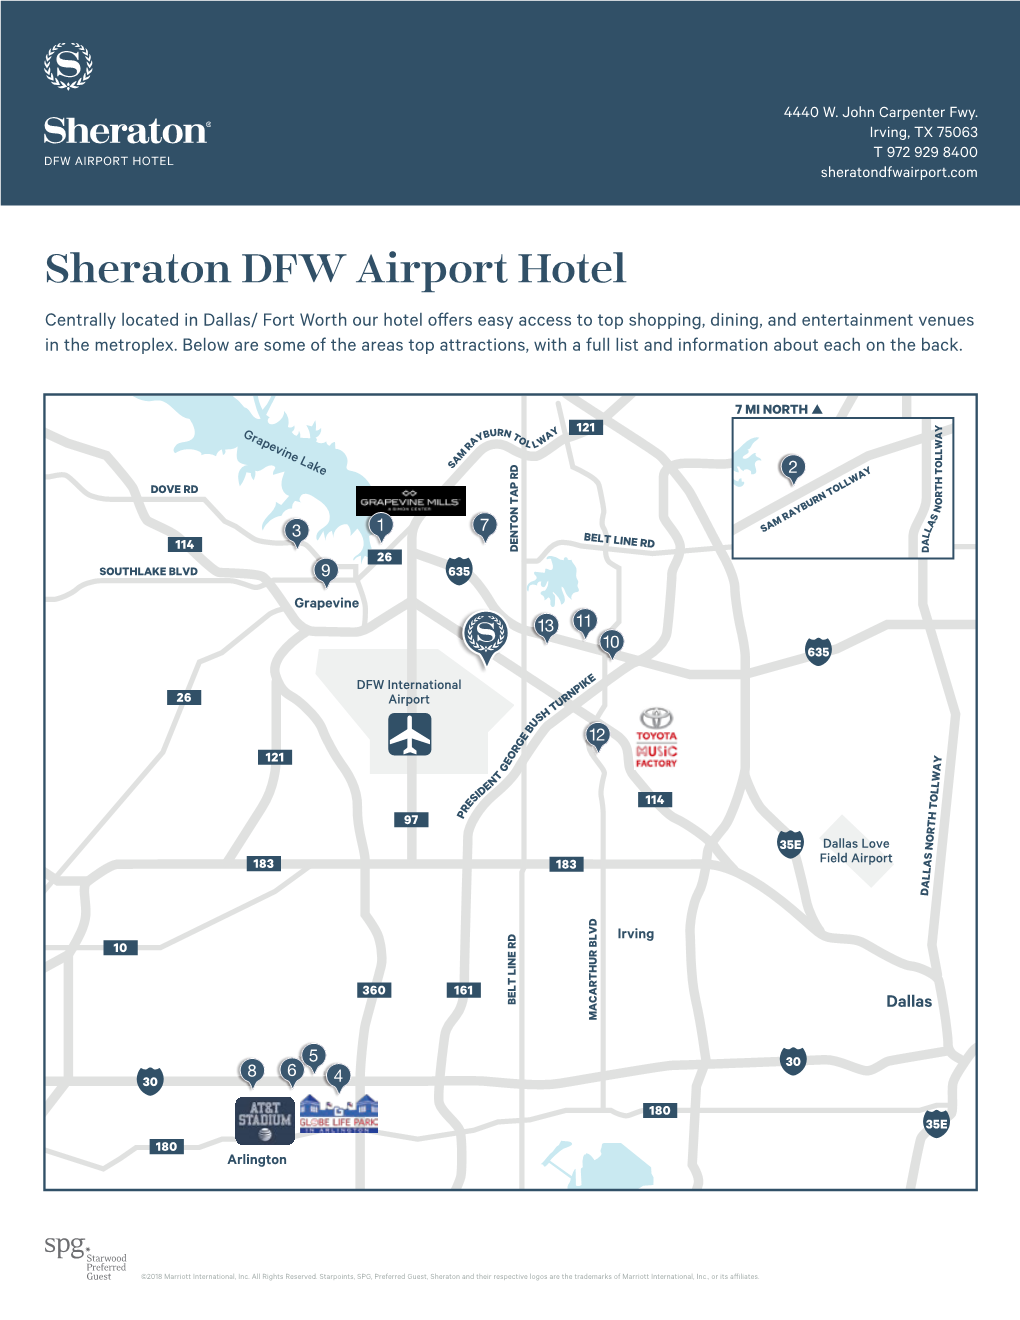 Sheraton DFW Airport Hotel Centrally Located in Dallas/ Fort Worth Our Hotel Offers Easy Access to Top Shopping, Dining, and Entertainment Venues in the Metroplex